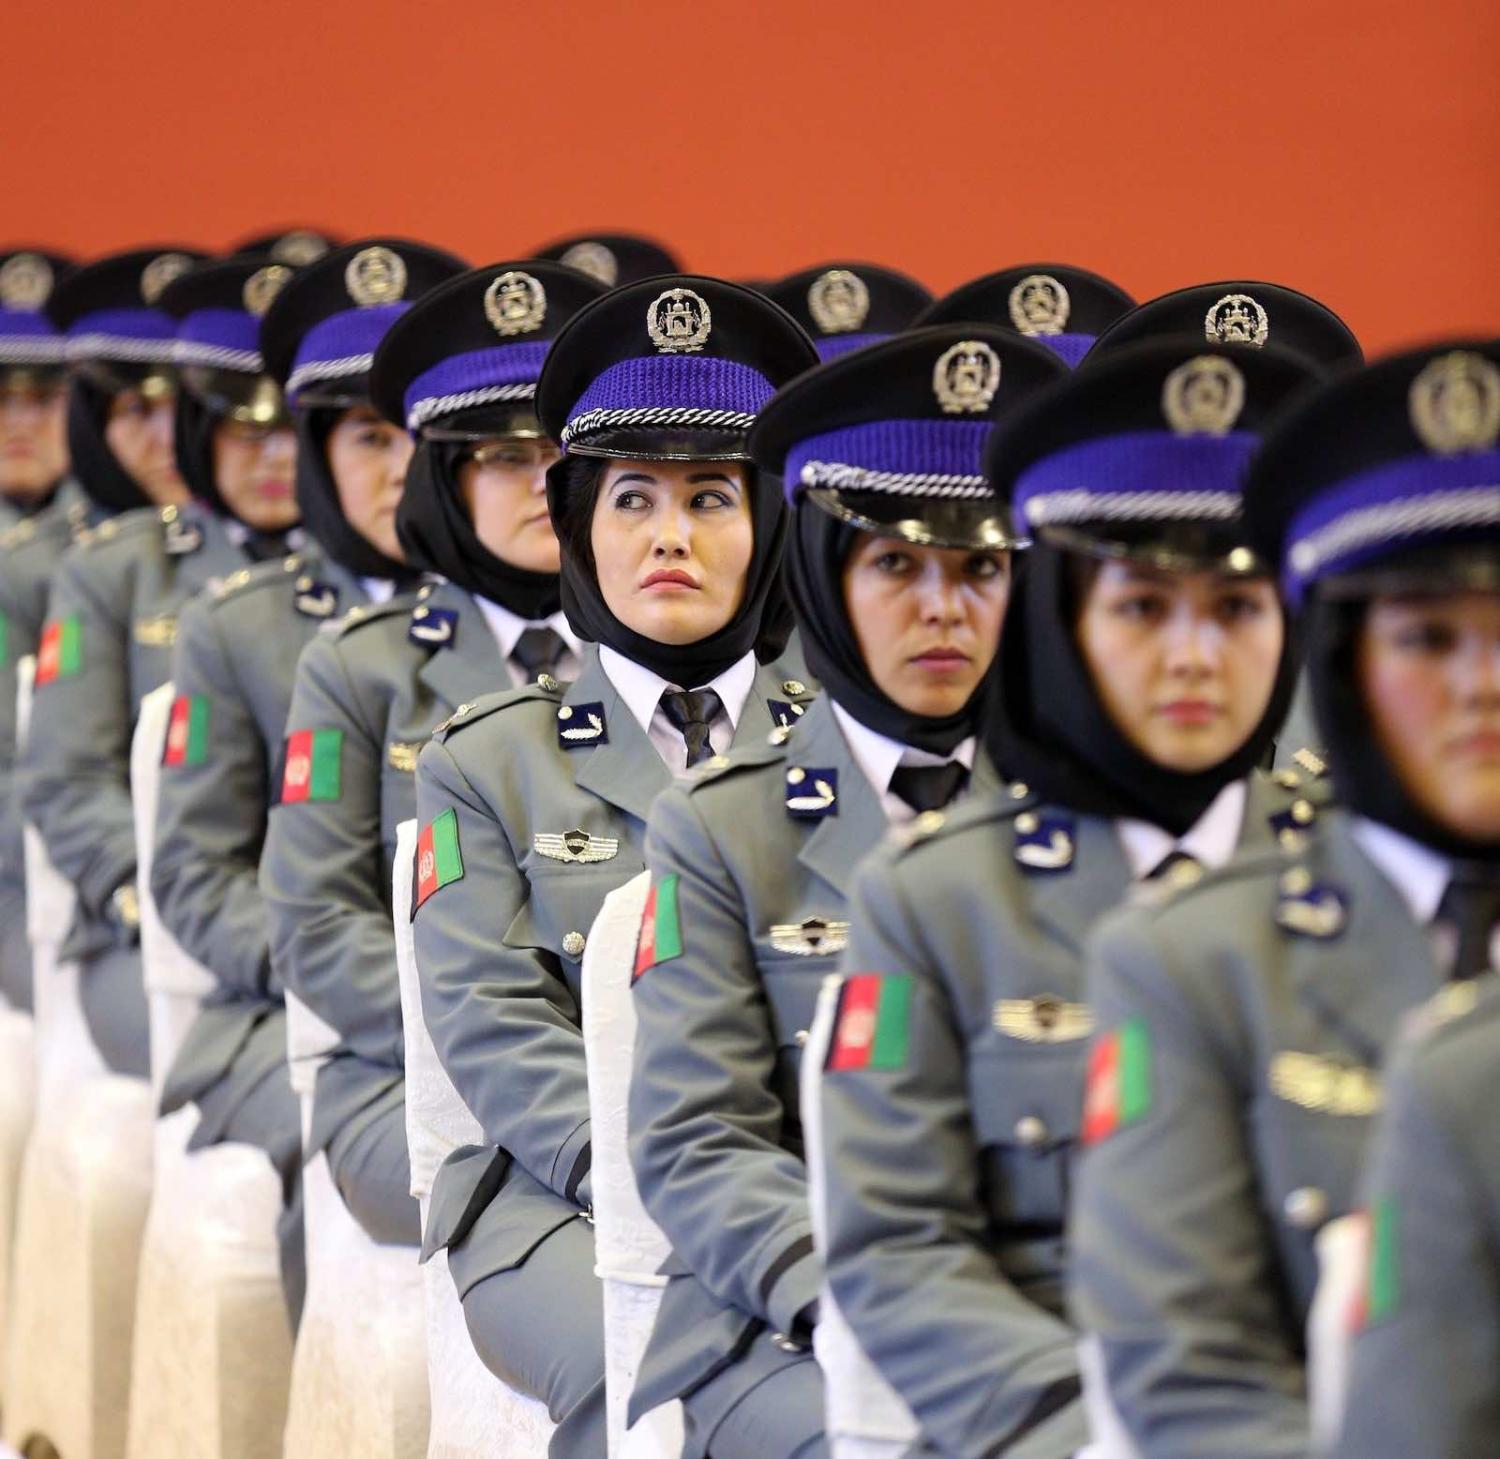 Afghani women police during a 2015 graduation ceremony (Serhat Cagdas/Anadolu Agency/Getty Images)